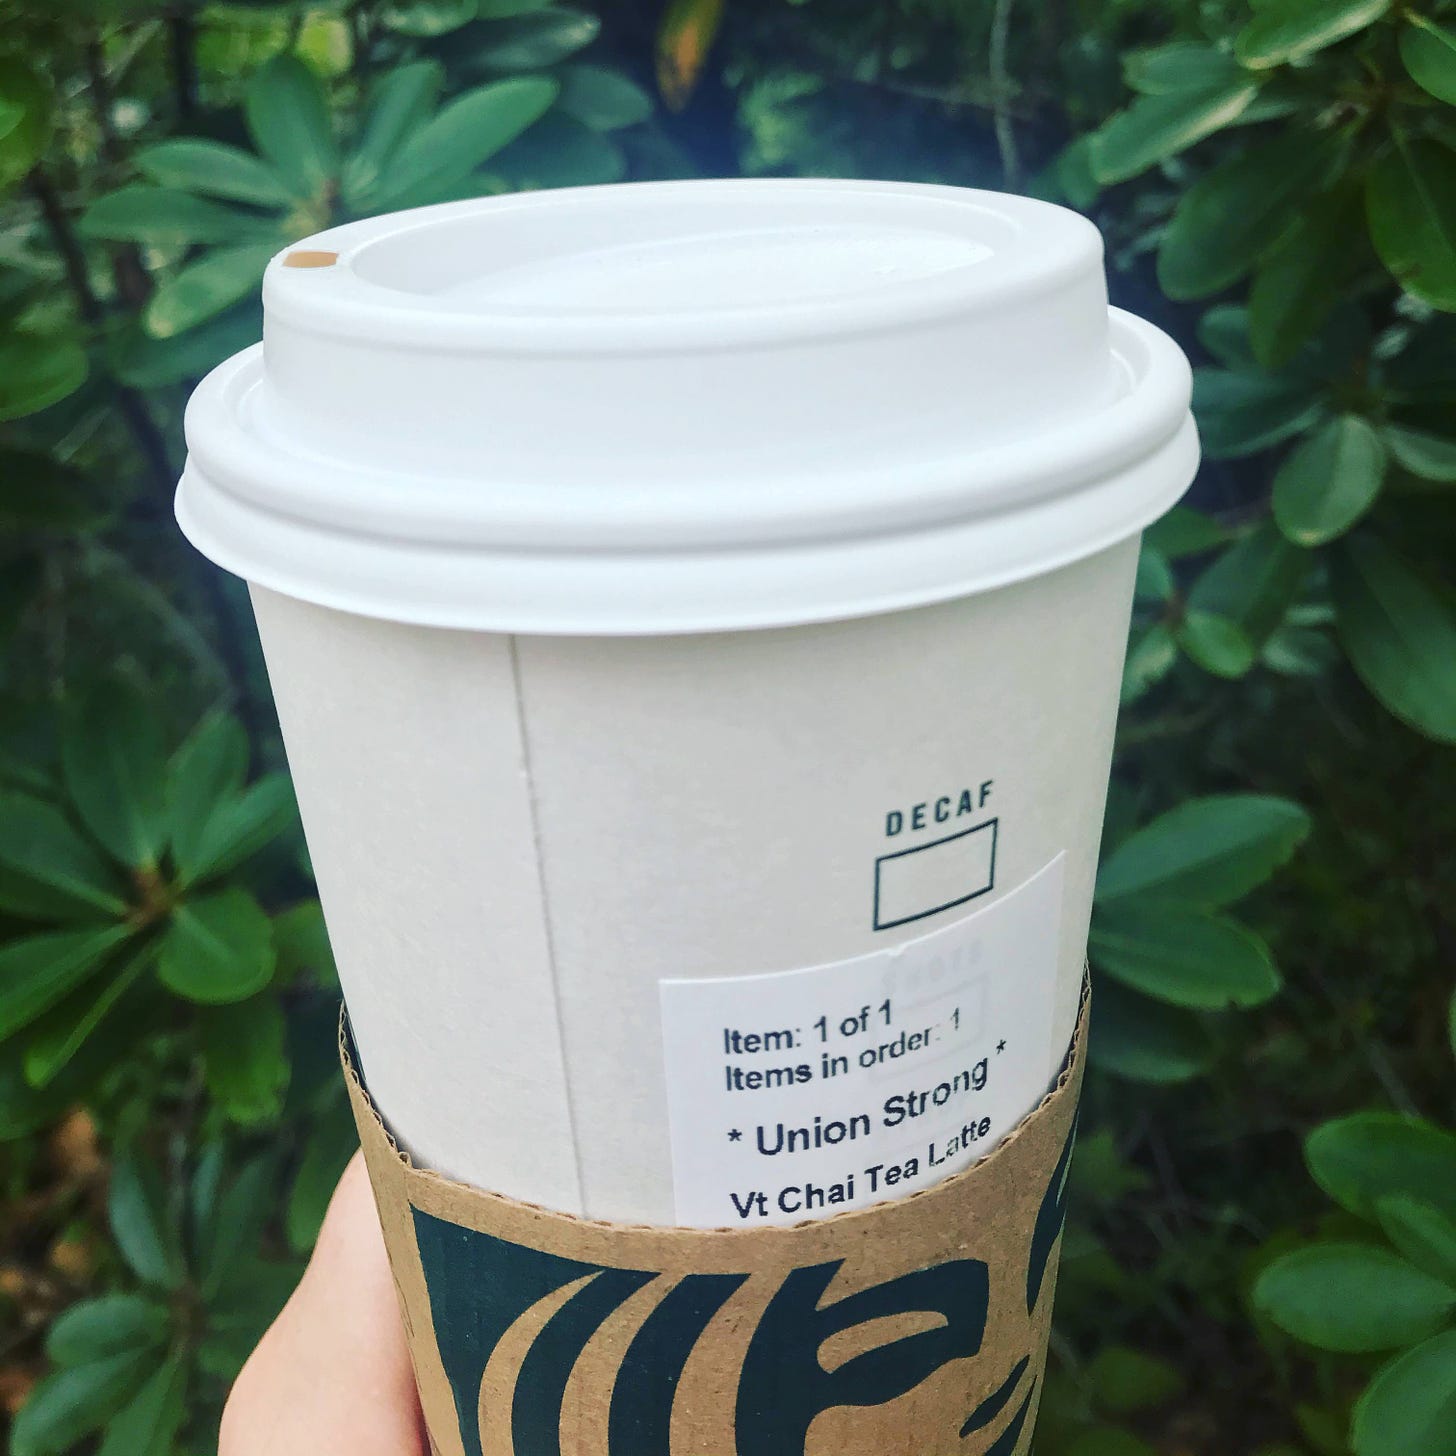 Starbucks coffee cup in front of dark green leaves. The label where the customer name goes reads Union Strong.